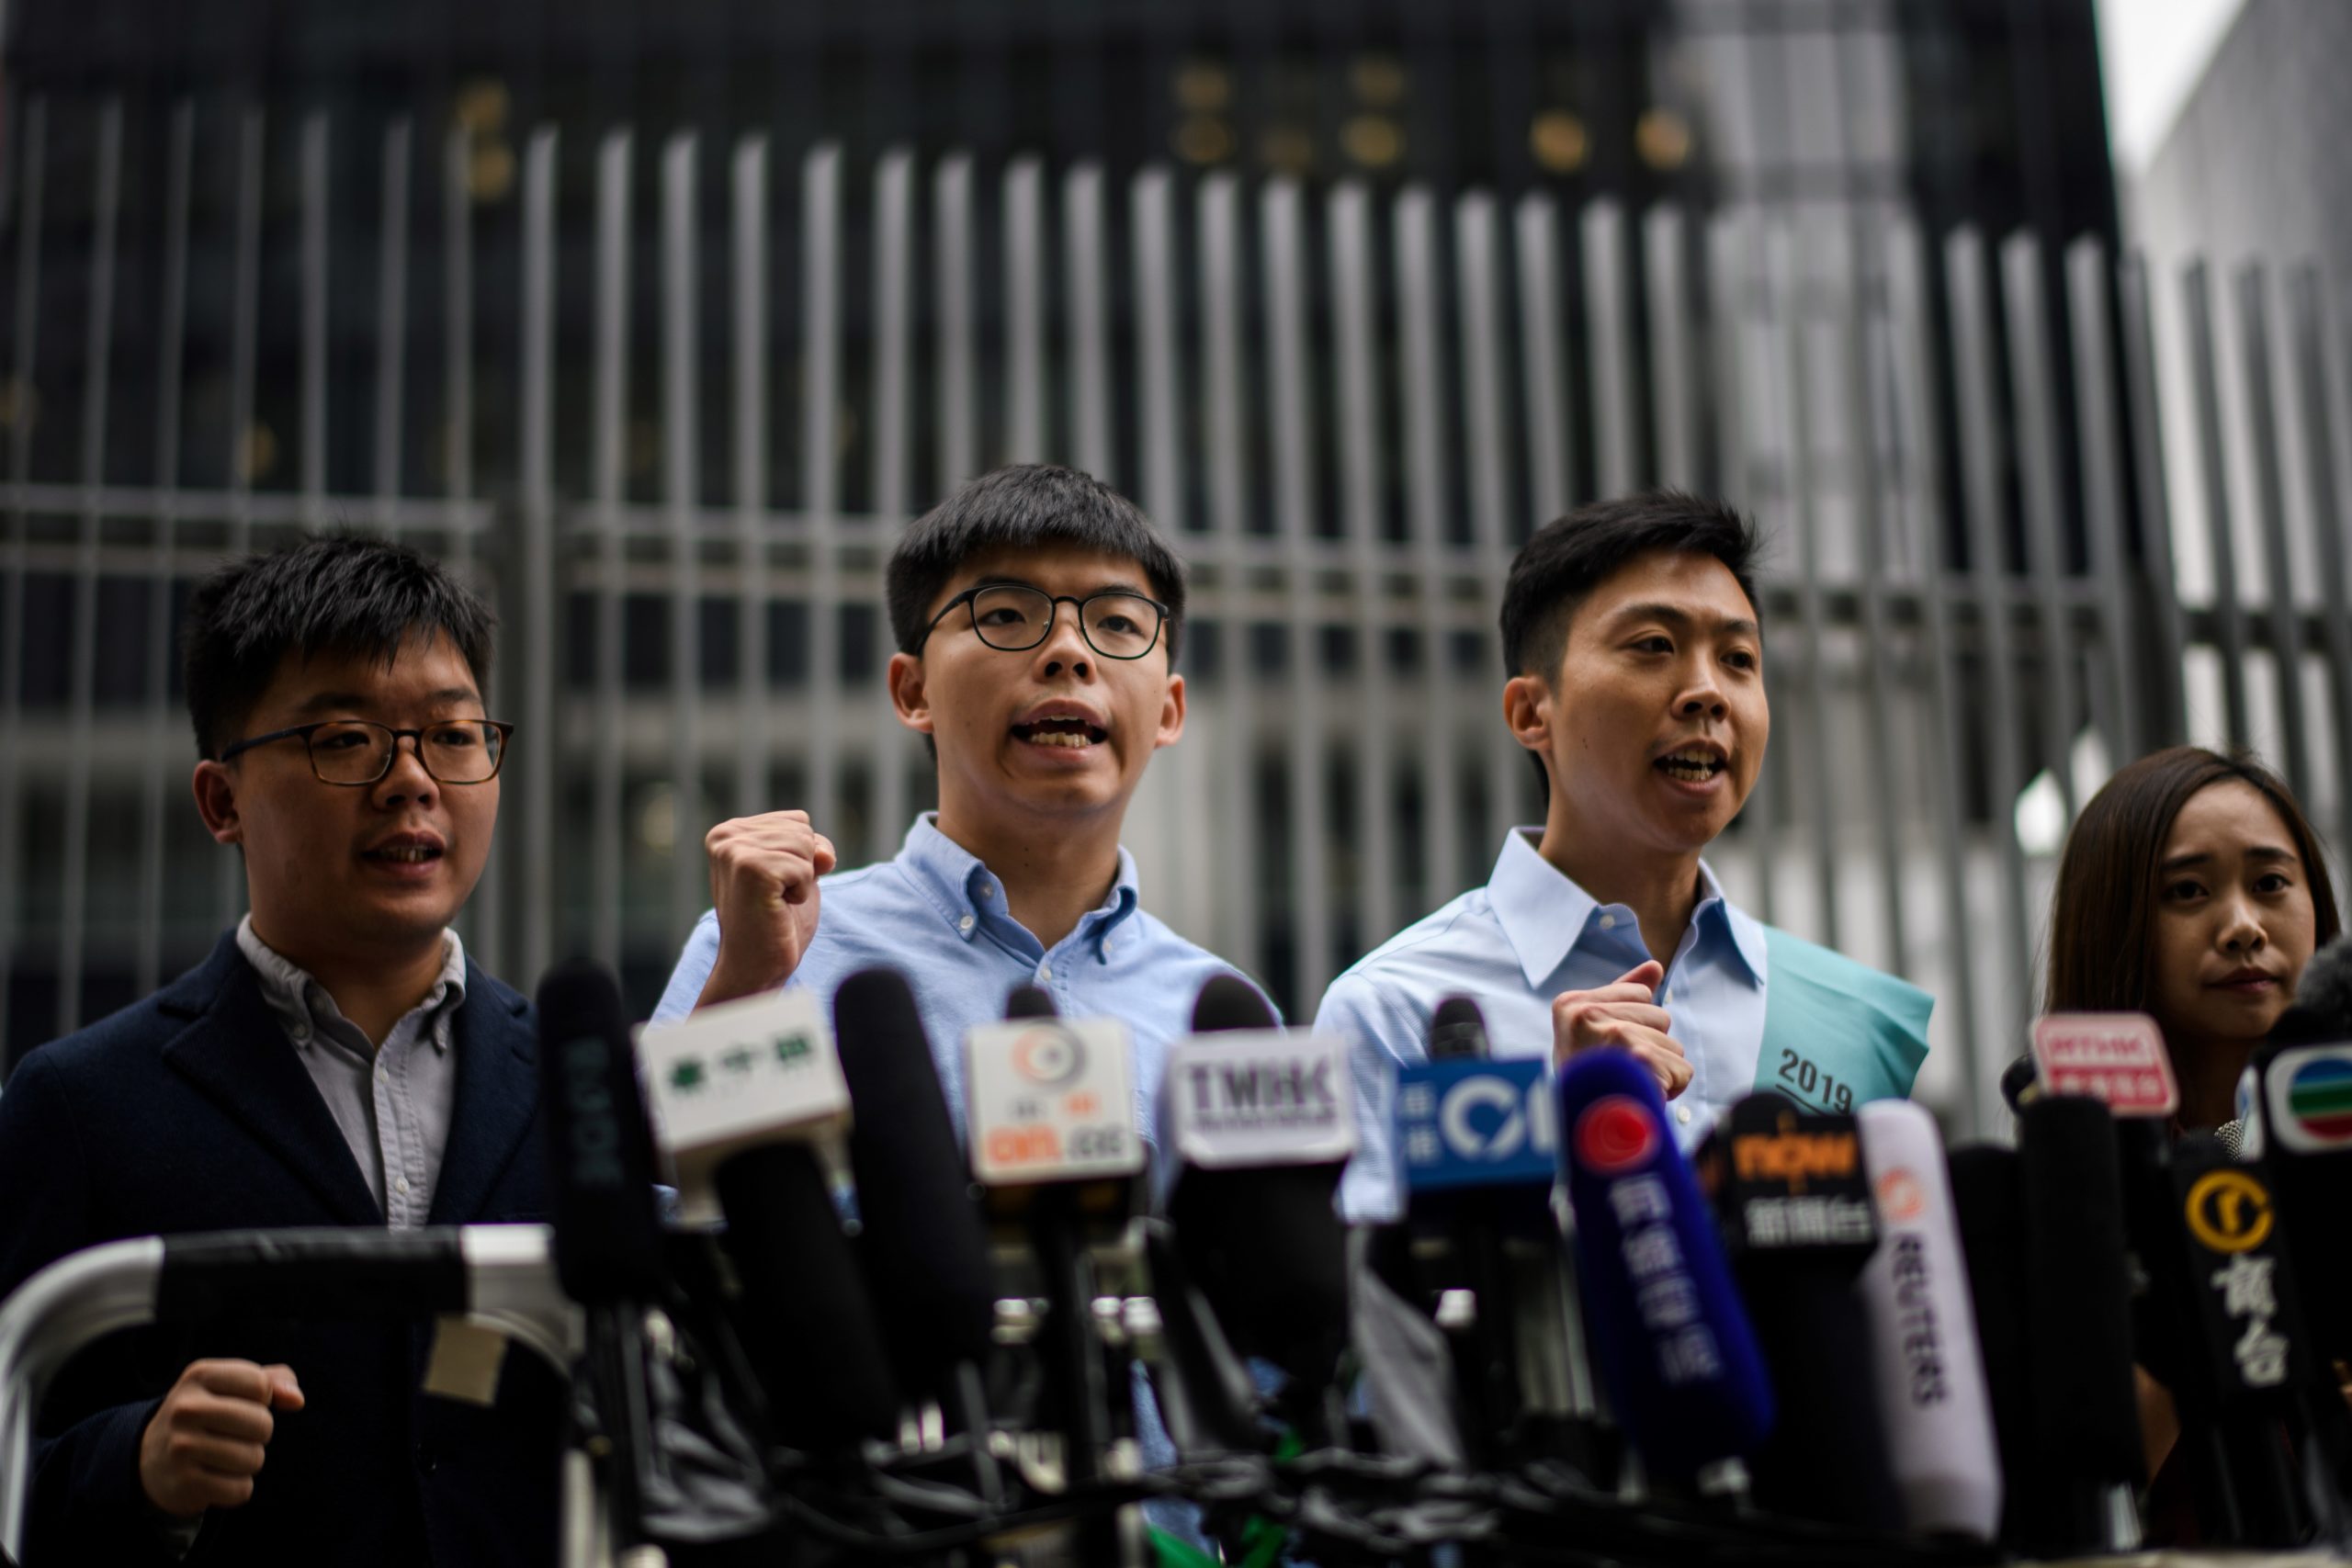 Pro-democracy activist Joshua Wong (2nd L) and Kelvin Lam (2nd R) shout slogans as they meet the media outside the Legislative Council (LegCo) in Hong Kong on October 29, 2019, after he was barred from standing in an upcoming local election. Wong was barred on October 29 from standing in an upcoming local election, after months of huge and frequently violent protests in the city. (Photo by ANTHONY WALLACE/AFP via Getty Images)